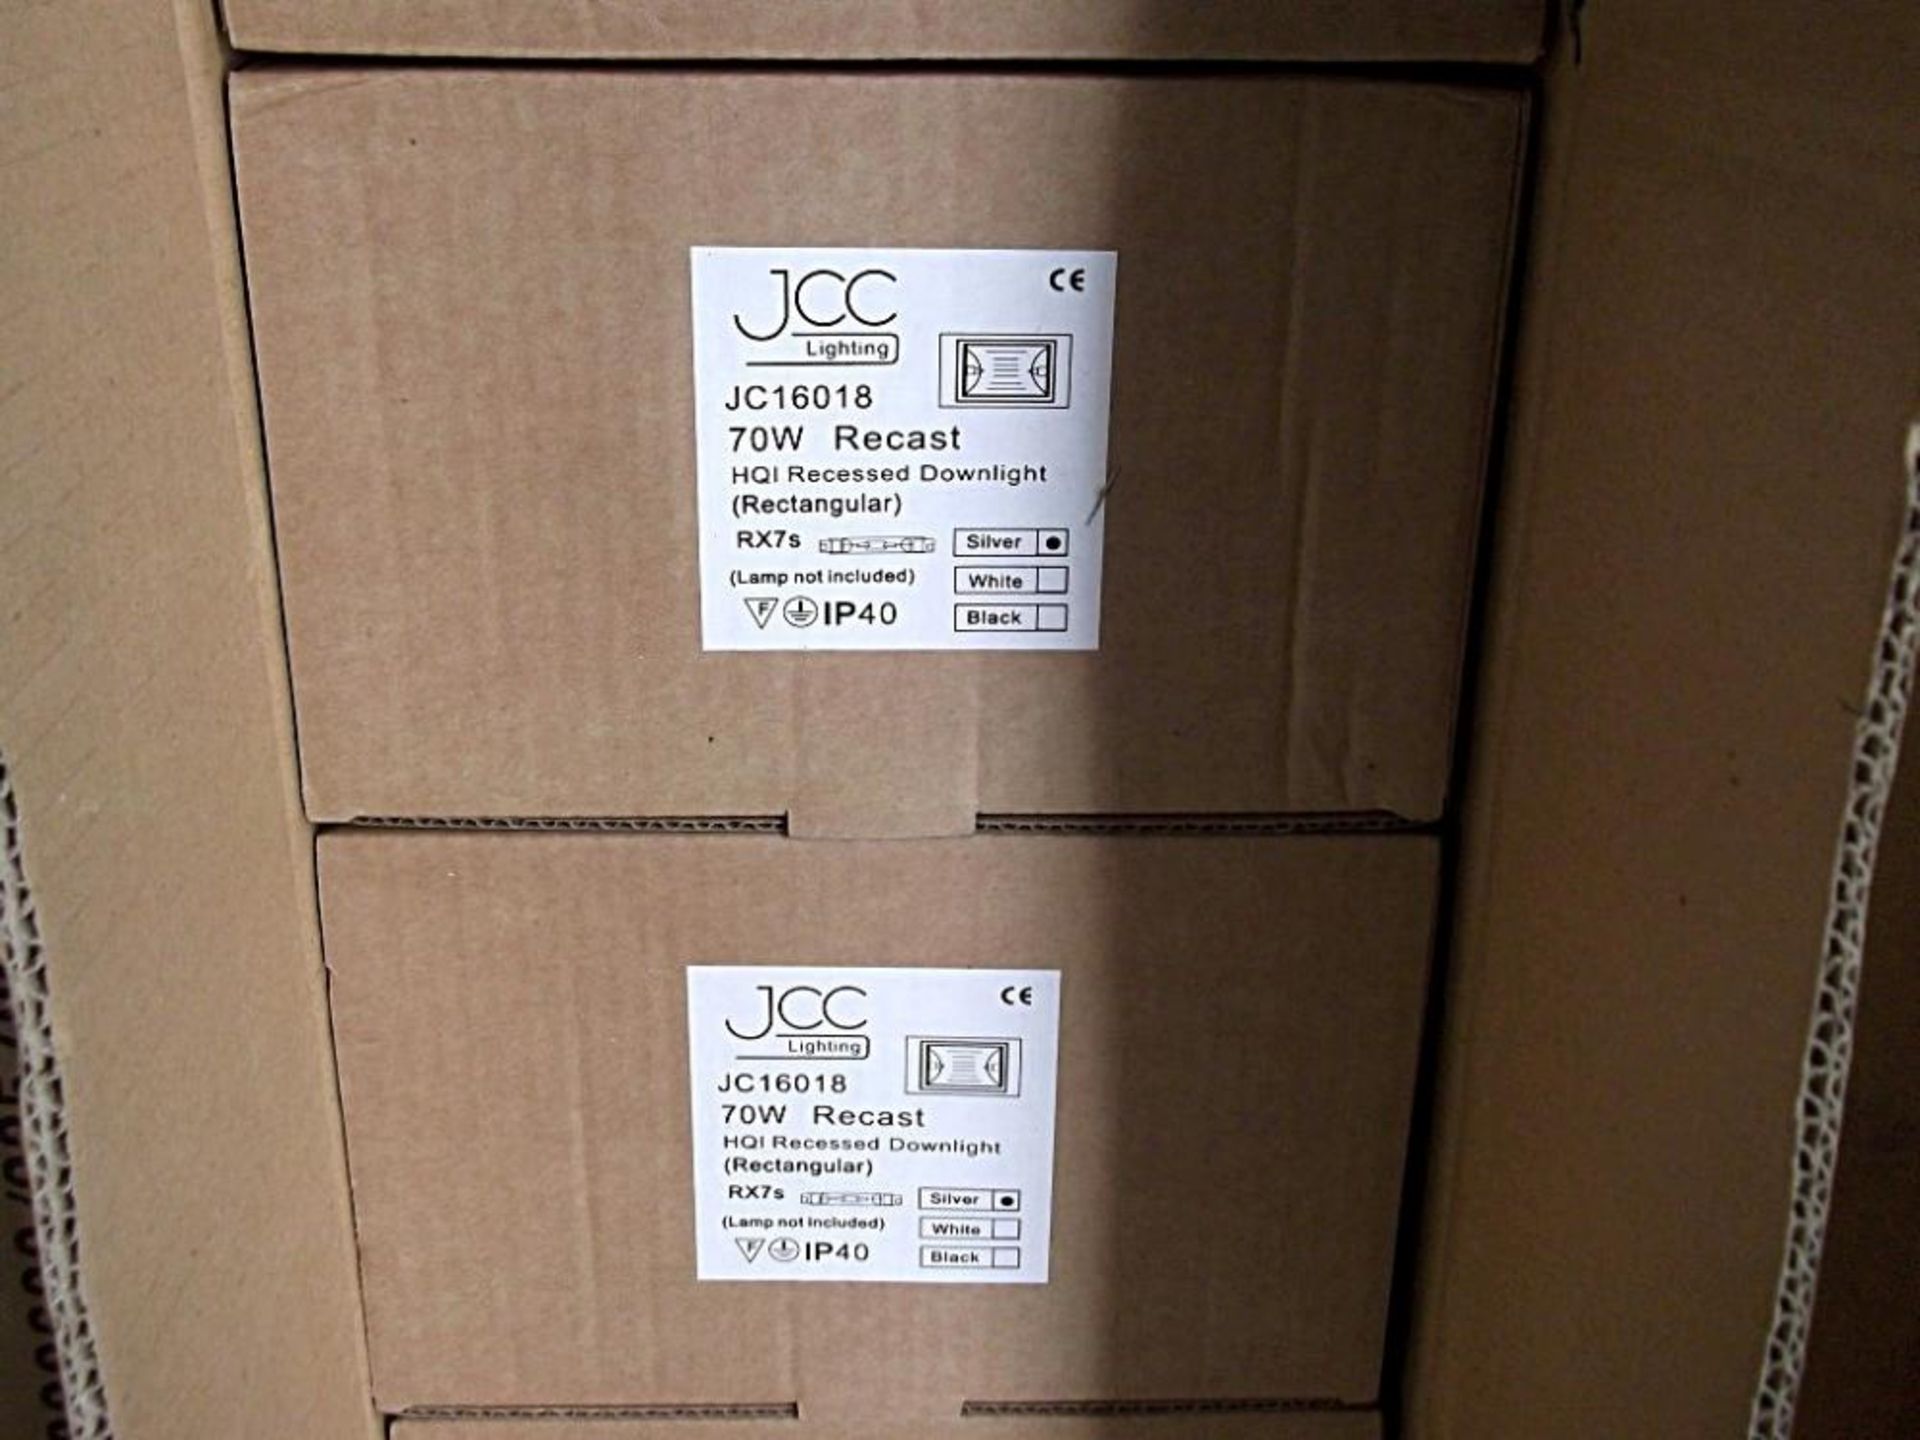 Bulk Lot of JCC Commercial Lighting - Approx 115 x Boxed Lights - New/Unused Stock - Image 12 of 31